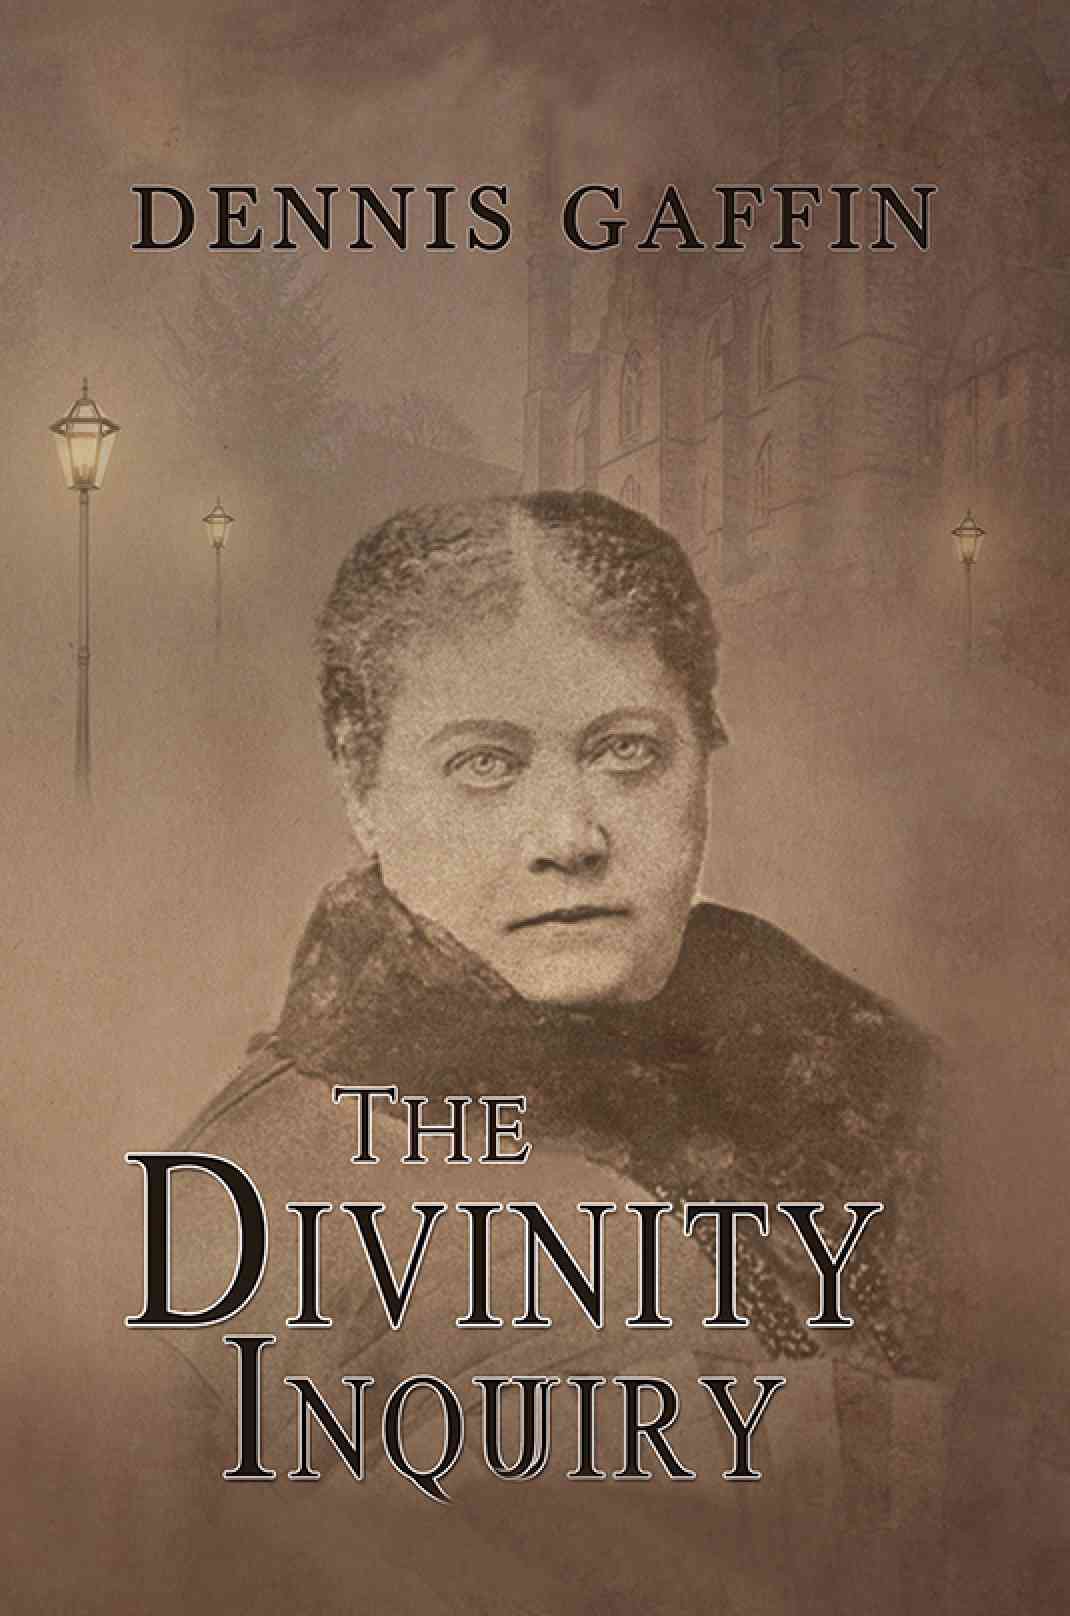 Acclaimed Historical Thriller Novel The Divinity Inquiry Featured by the Digital Journal